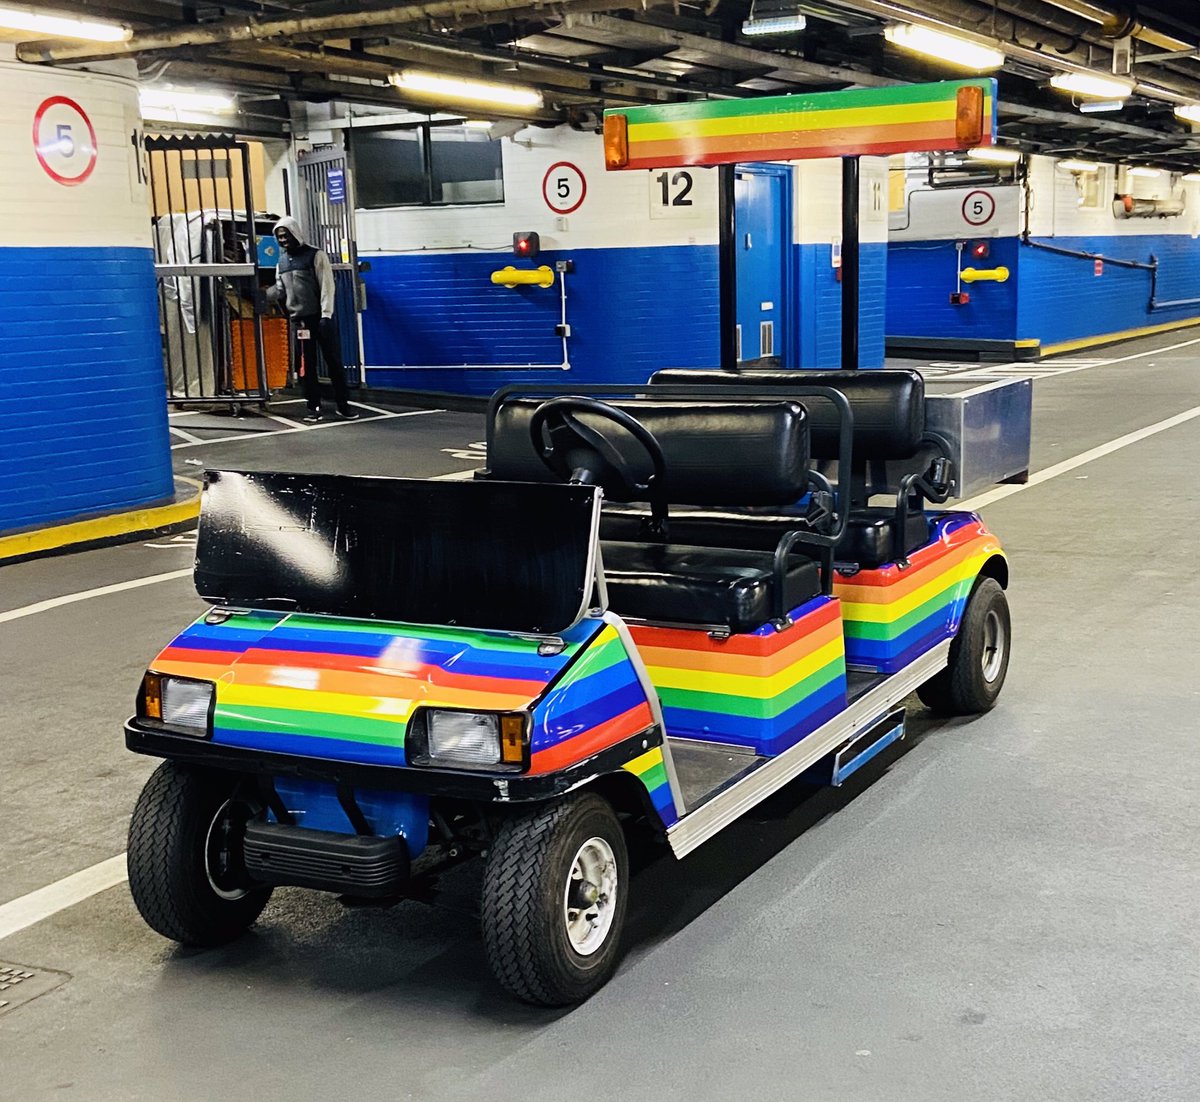 [2/8] This 'buggy-bow' is adorned with your basic Rainbow Pride Flag, comprised of six colours. Designed by American artist and gay rights activist Gilbert Baker. Buggy-bow and image from  @NetworkRailEUS